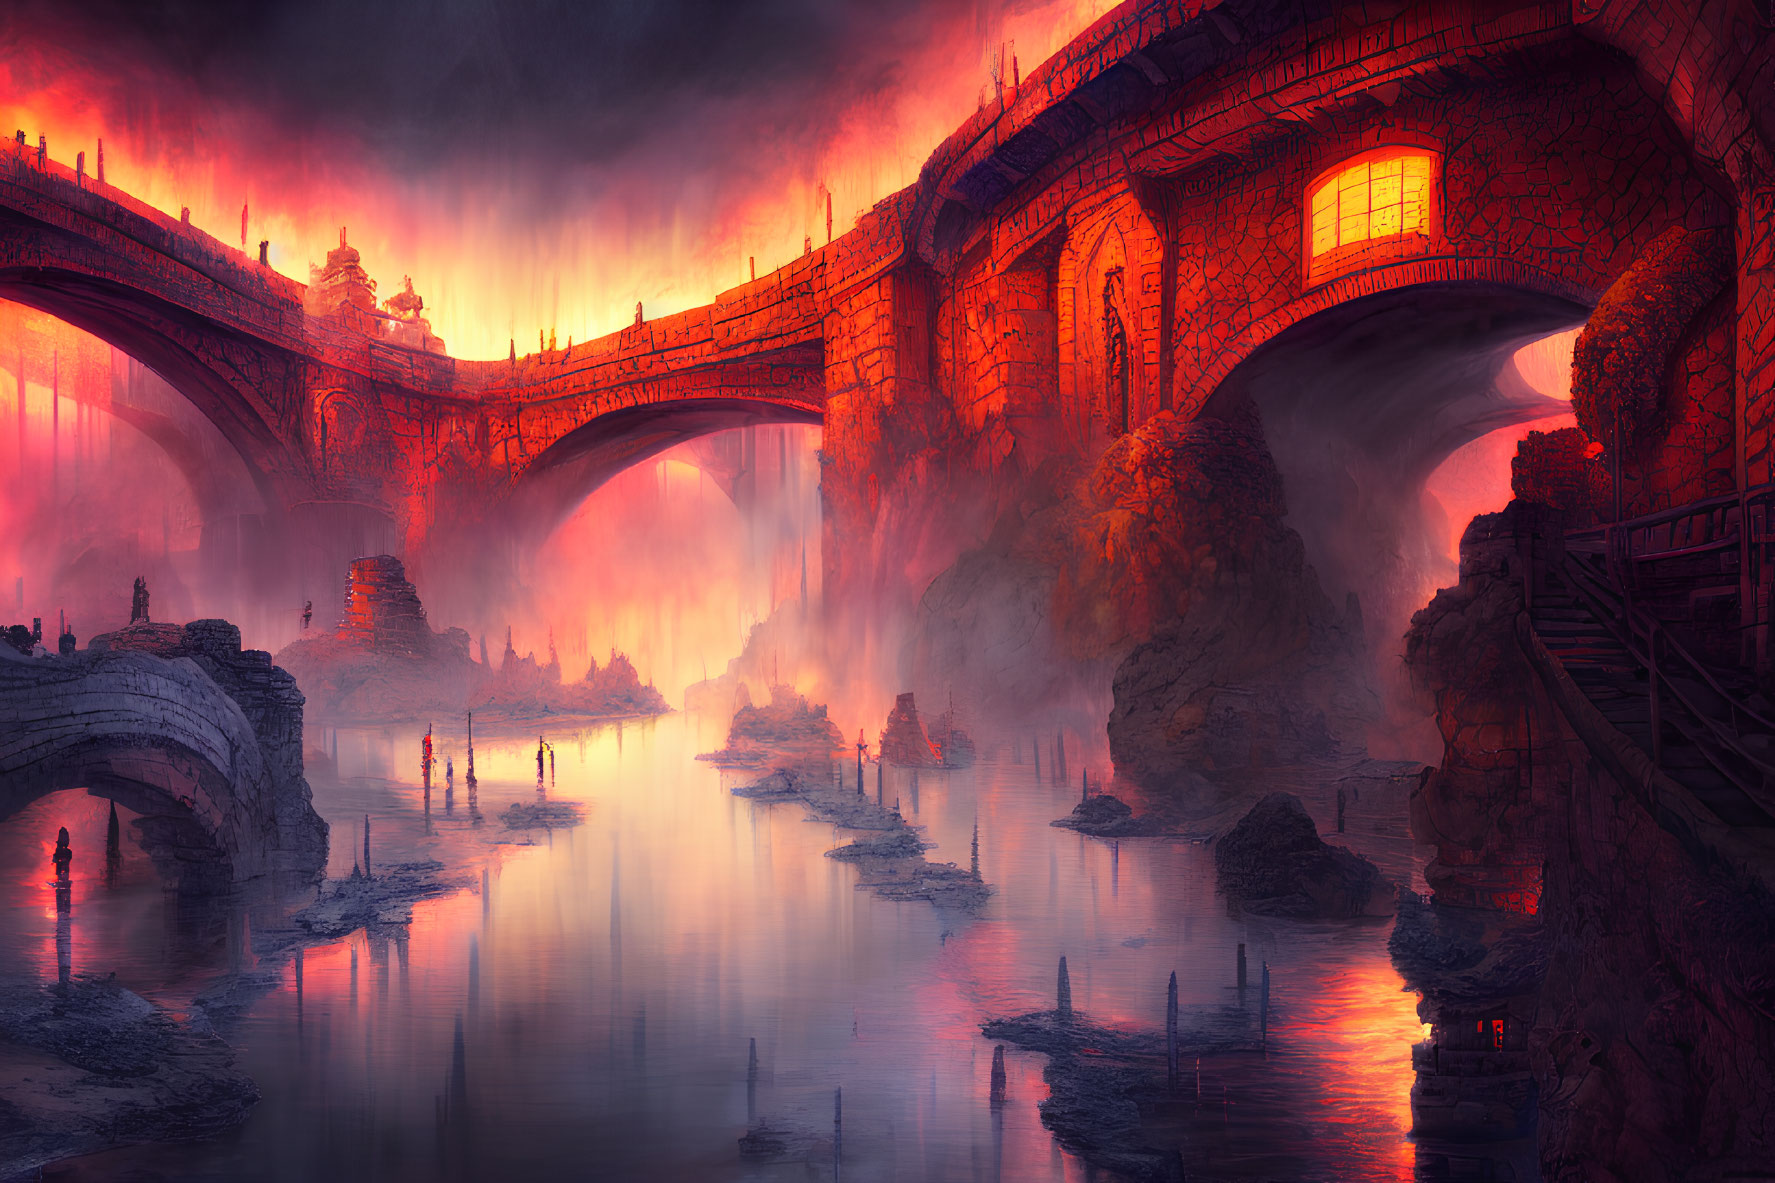 Fantastical landscape with fiery skies and stone bridges over misty river